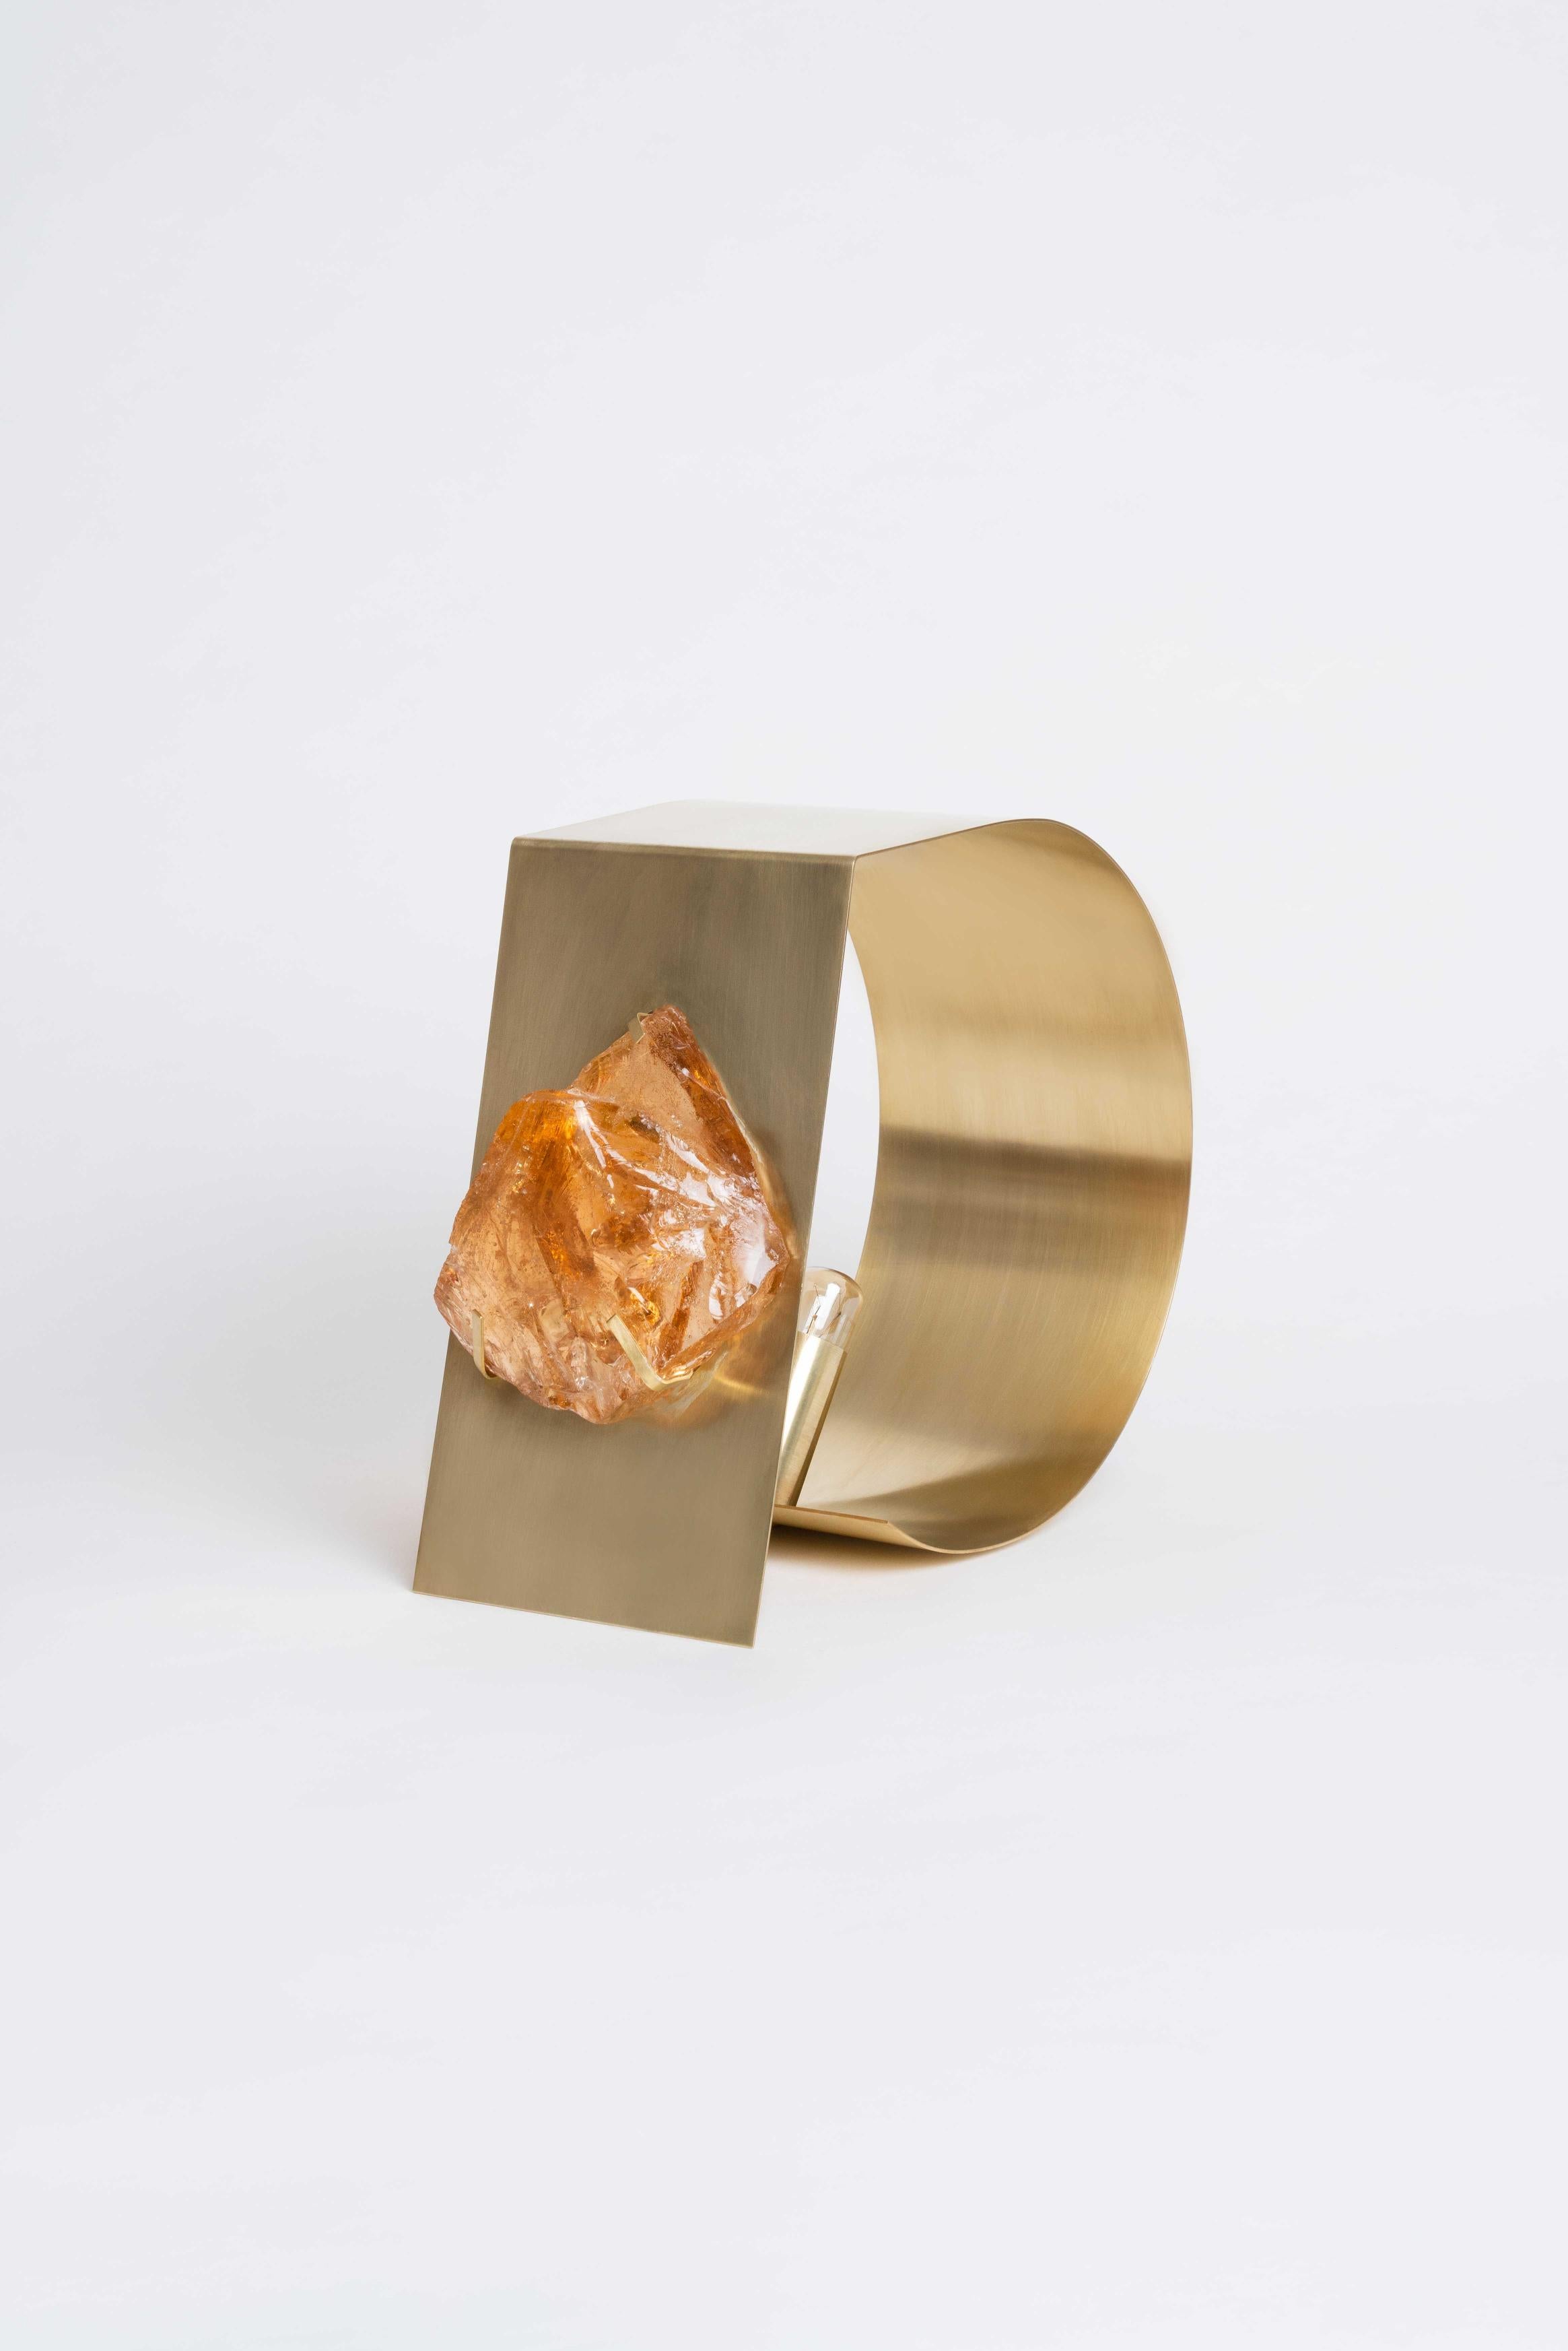 Gems Ambre table lamp by Marie Jeunet
Dimensions: w 13 x d 24 x h 23.5 cm
Materials: Amber crystal and brushed brass.

Gems Collection
At the border between art and goldsmithing, this collection invites the world of jewelry to sublimate our